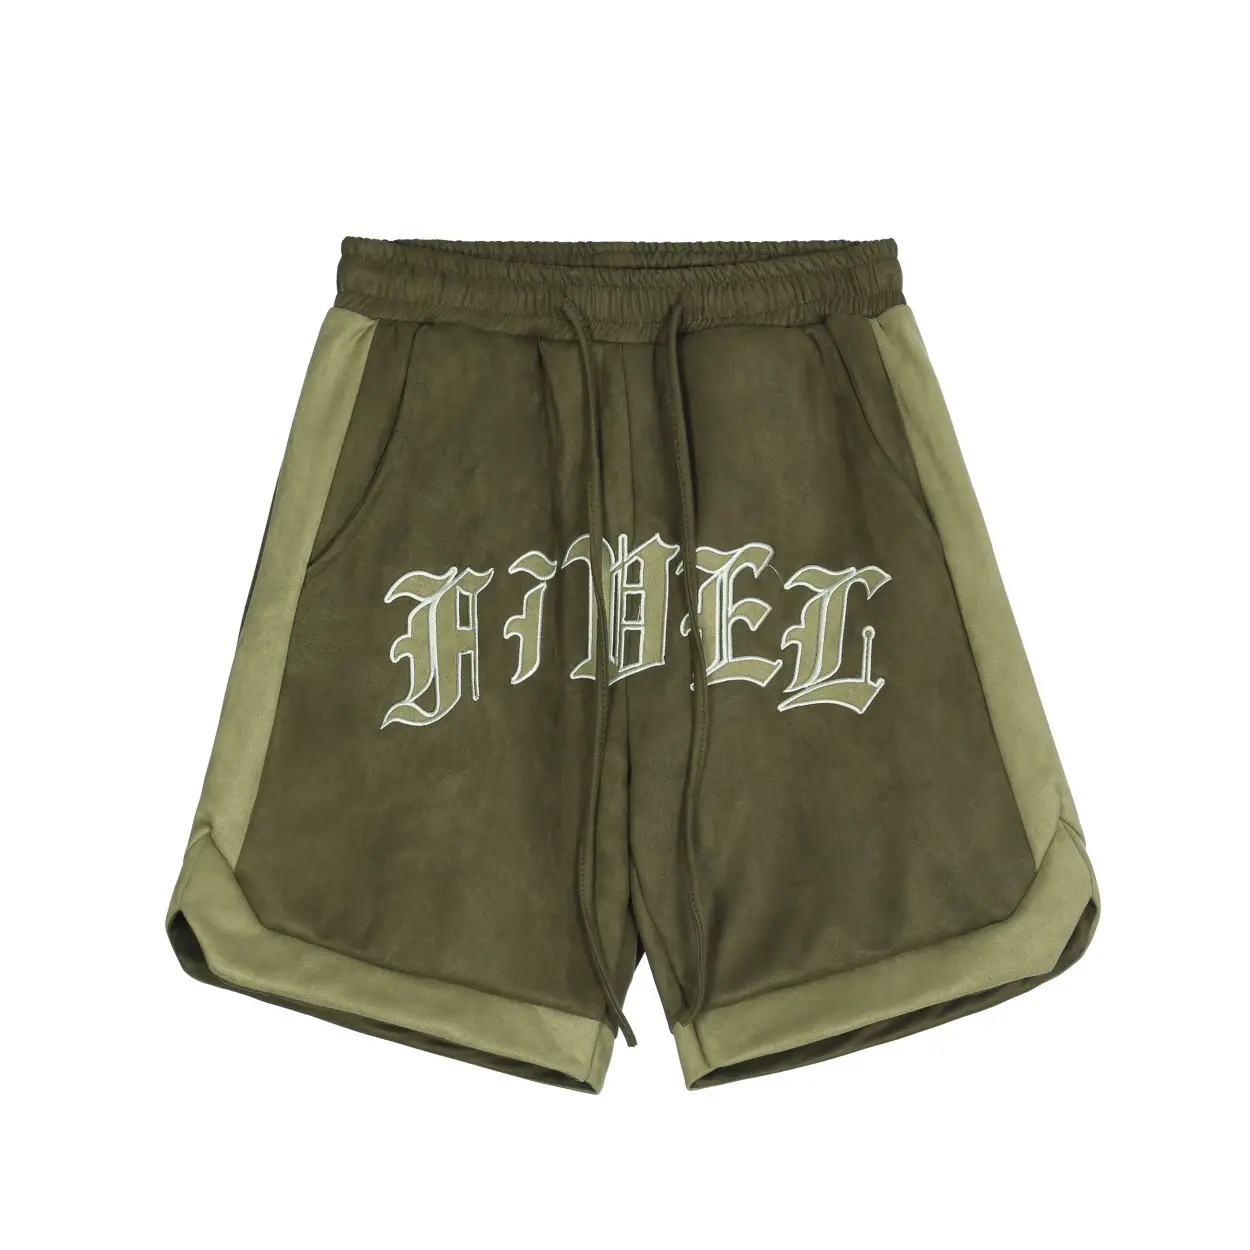 Custom Suede Fabric Heavyweight Shorts Premium Embroidered Color Block Shorts Men's Gothic Letters Shorts